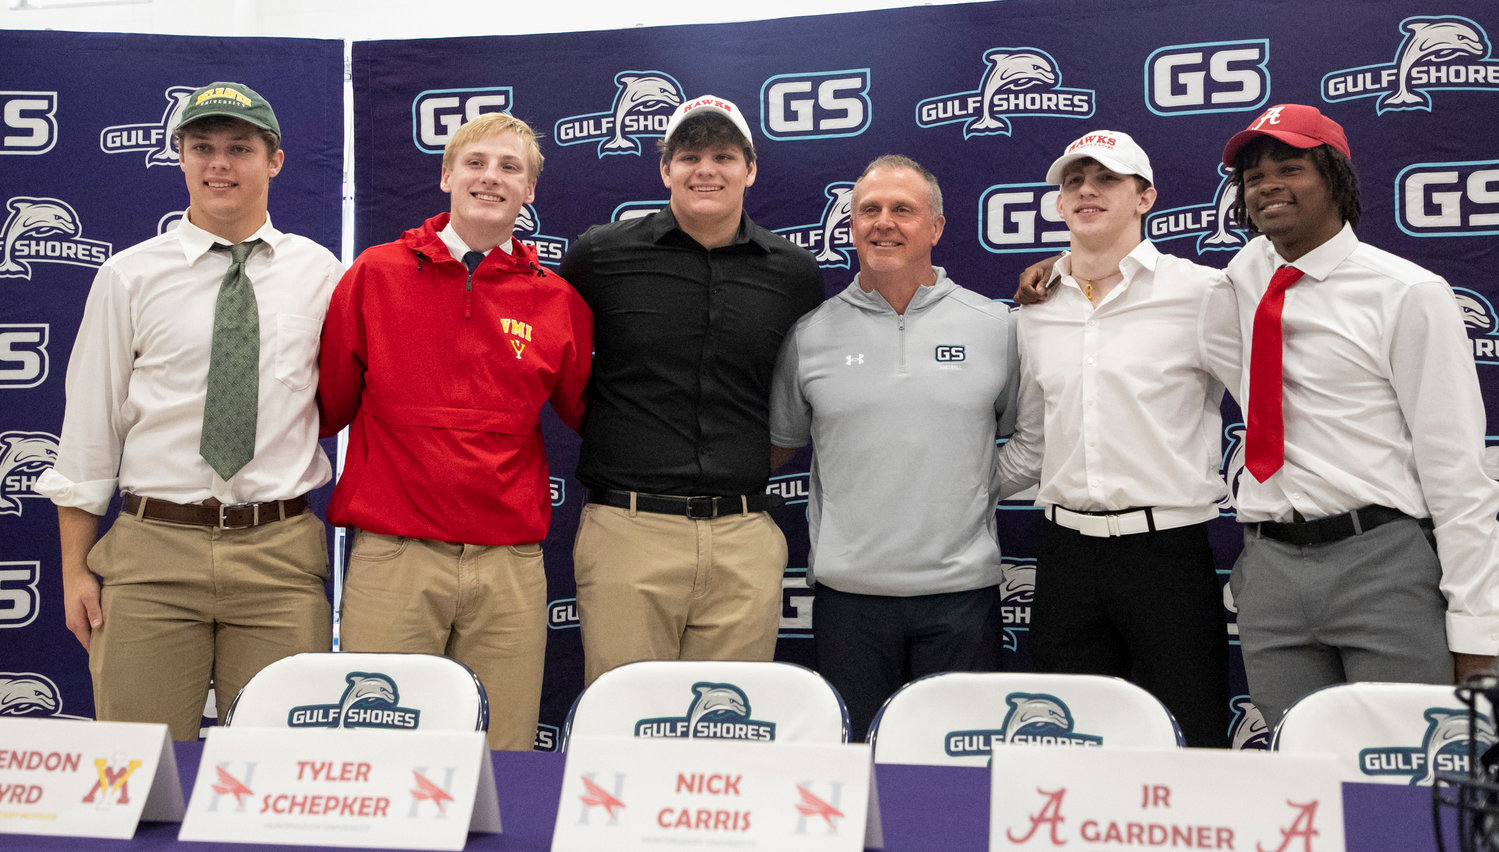 Gulf Shores head football coach Mark Hudspeth joins the five Dolphin signees that put pen to paper on National Letters of Intent Wednesday, Feb. 1, at the high school. Brax Duncan signed with Belhaven, Brendon Byrd chose Virginia Military Institute, Tyler Schepker and Nick Carris penned commitments to Huntingdon and J.R. Gardner signed with Alabama.